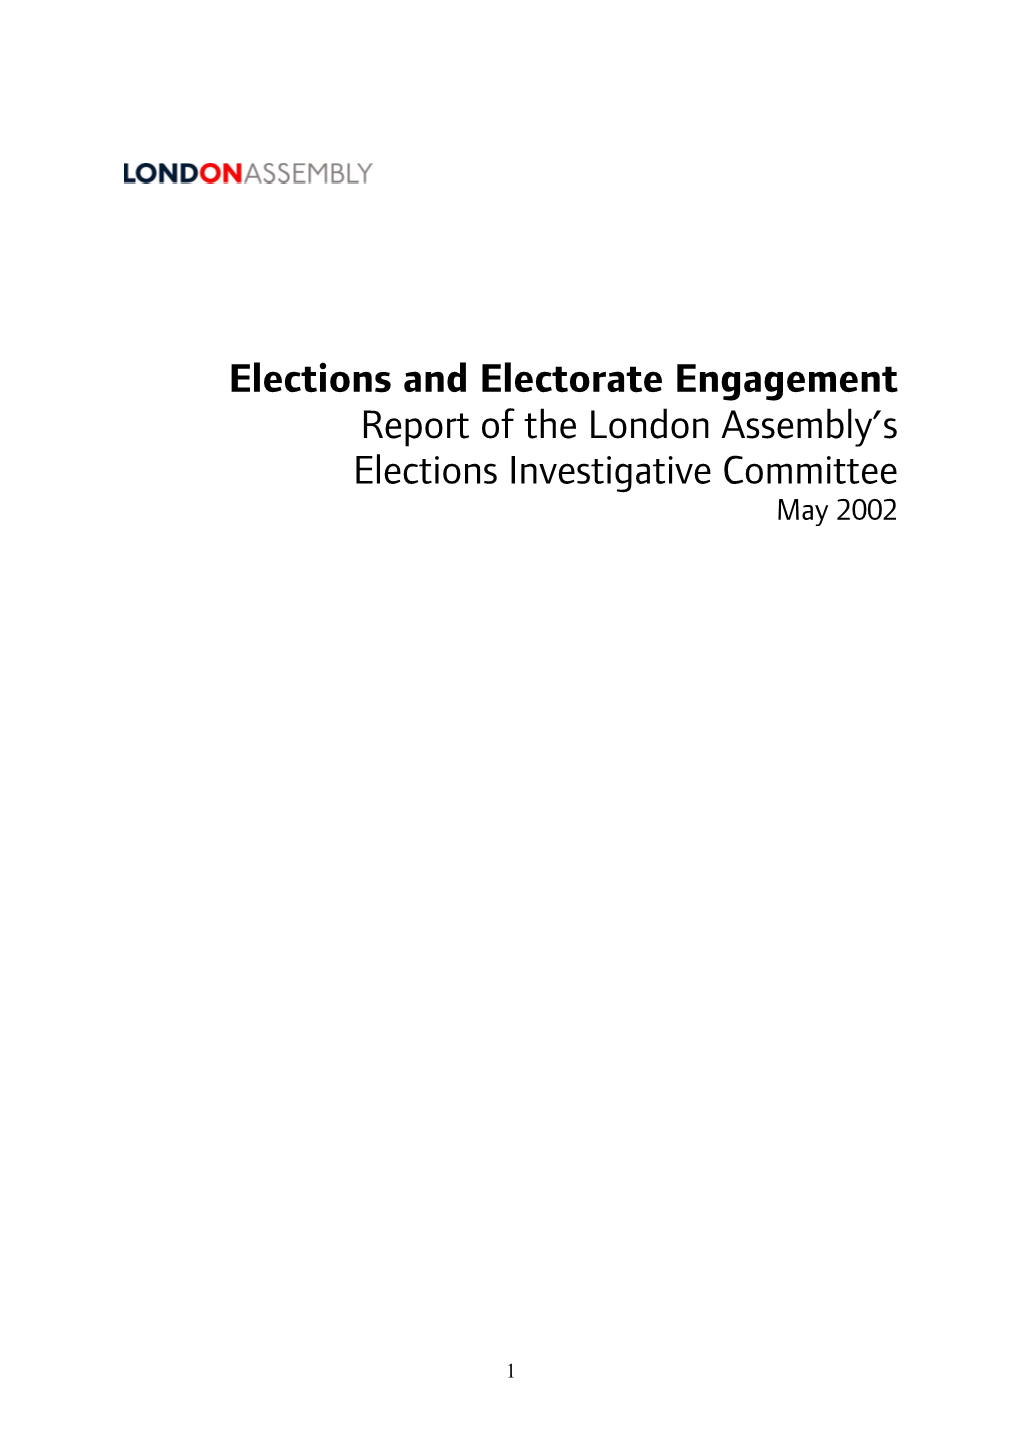 Elections and Electorate Engagement Report of the London Assembly’S Elections Investigative Committee May 2002